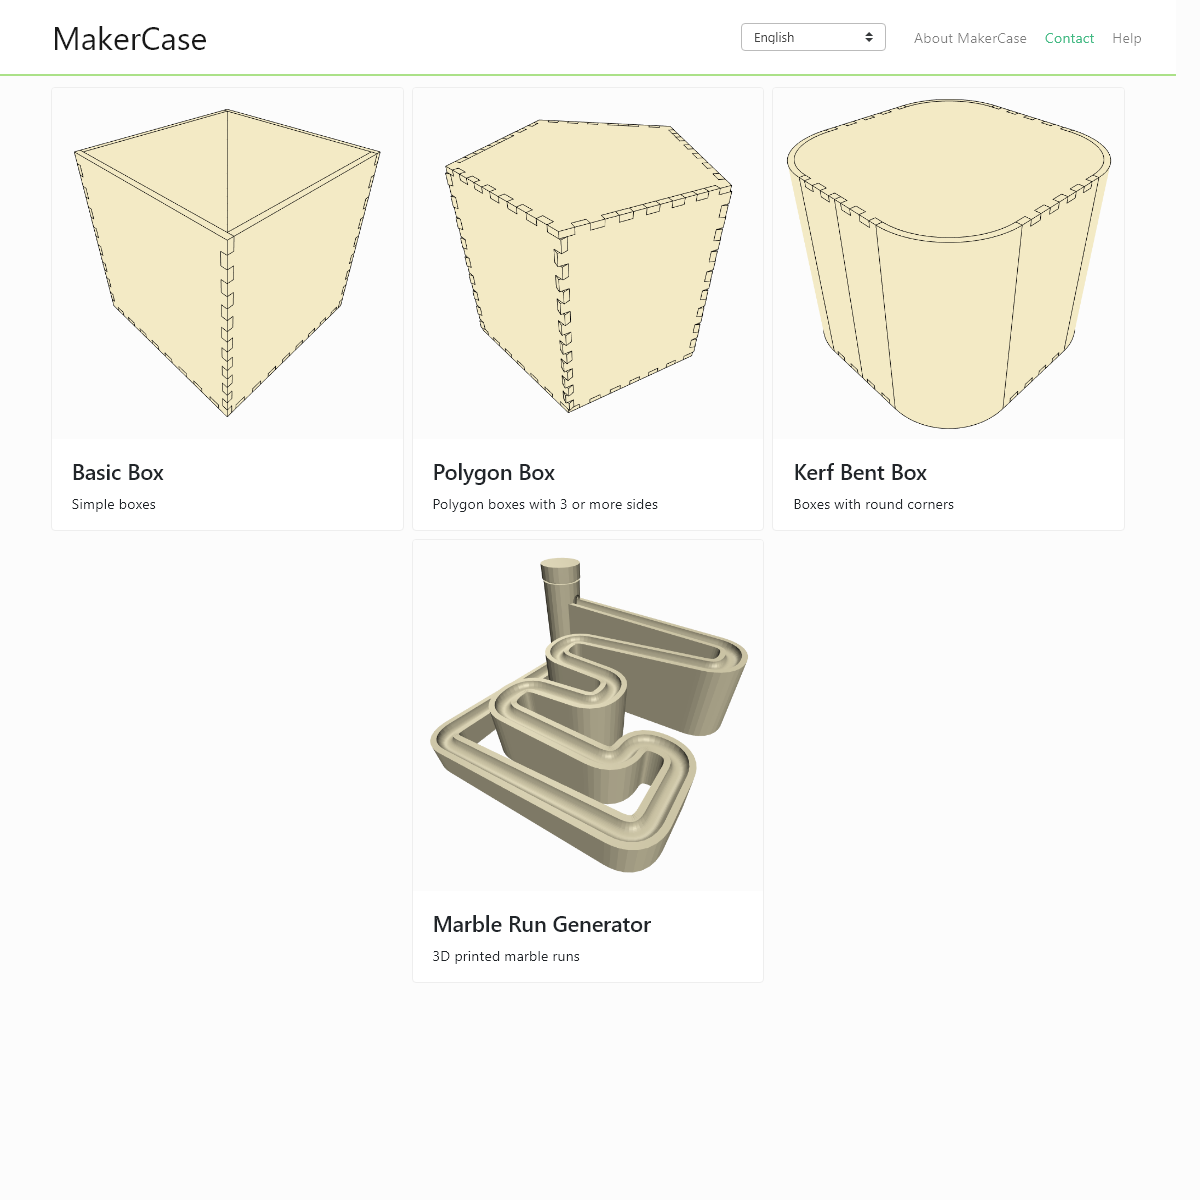 A complete backup of makercase.com